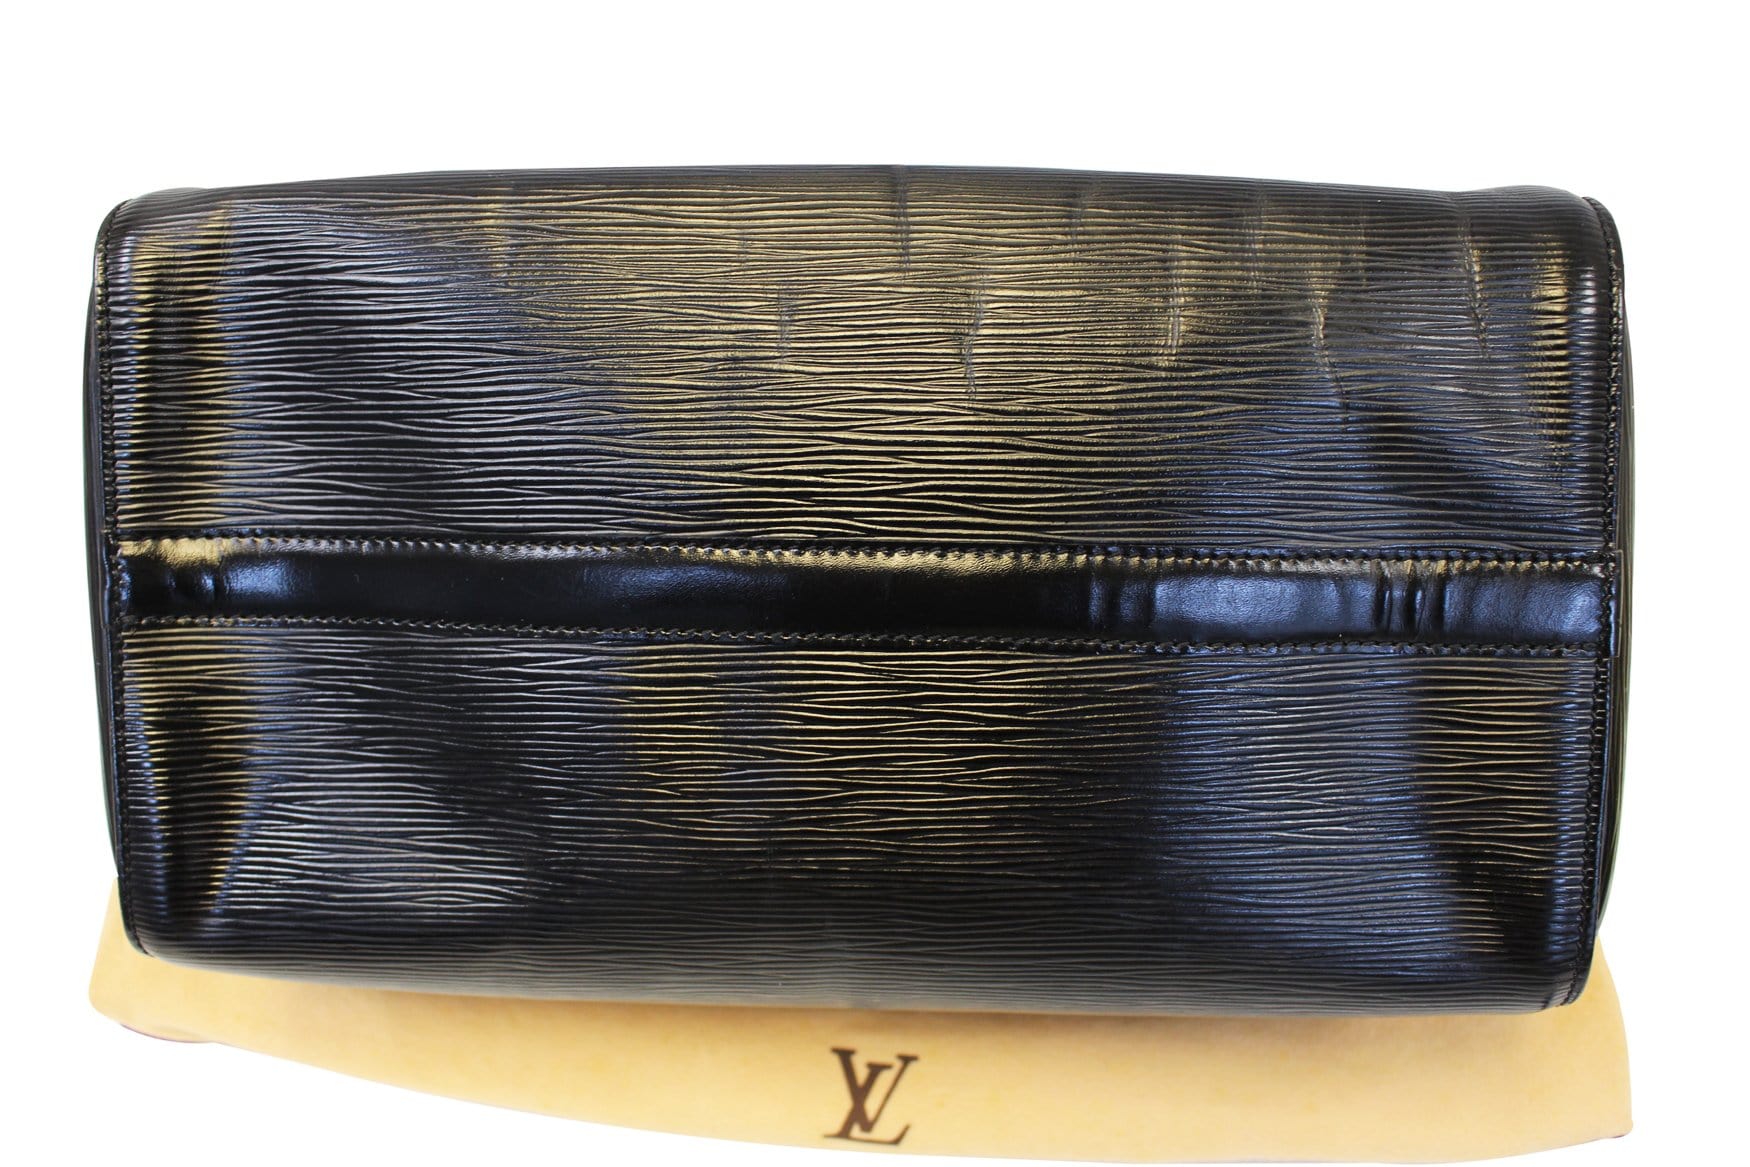 LOUIS VUITTON SPEEDY 30, epi leather black LV initials on the front, side  pocket, silver tone hardware and padlock (no keys), two top handles, fabric  lining, 30cm x 19cm H x 15cm.